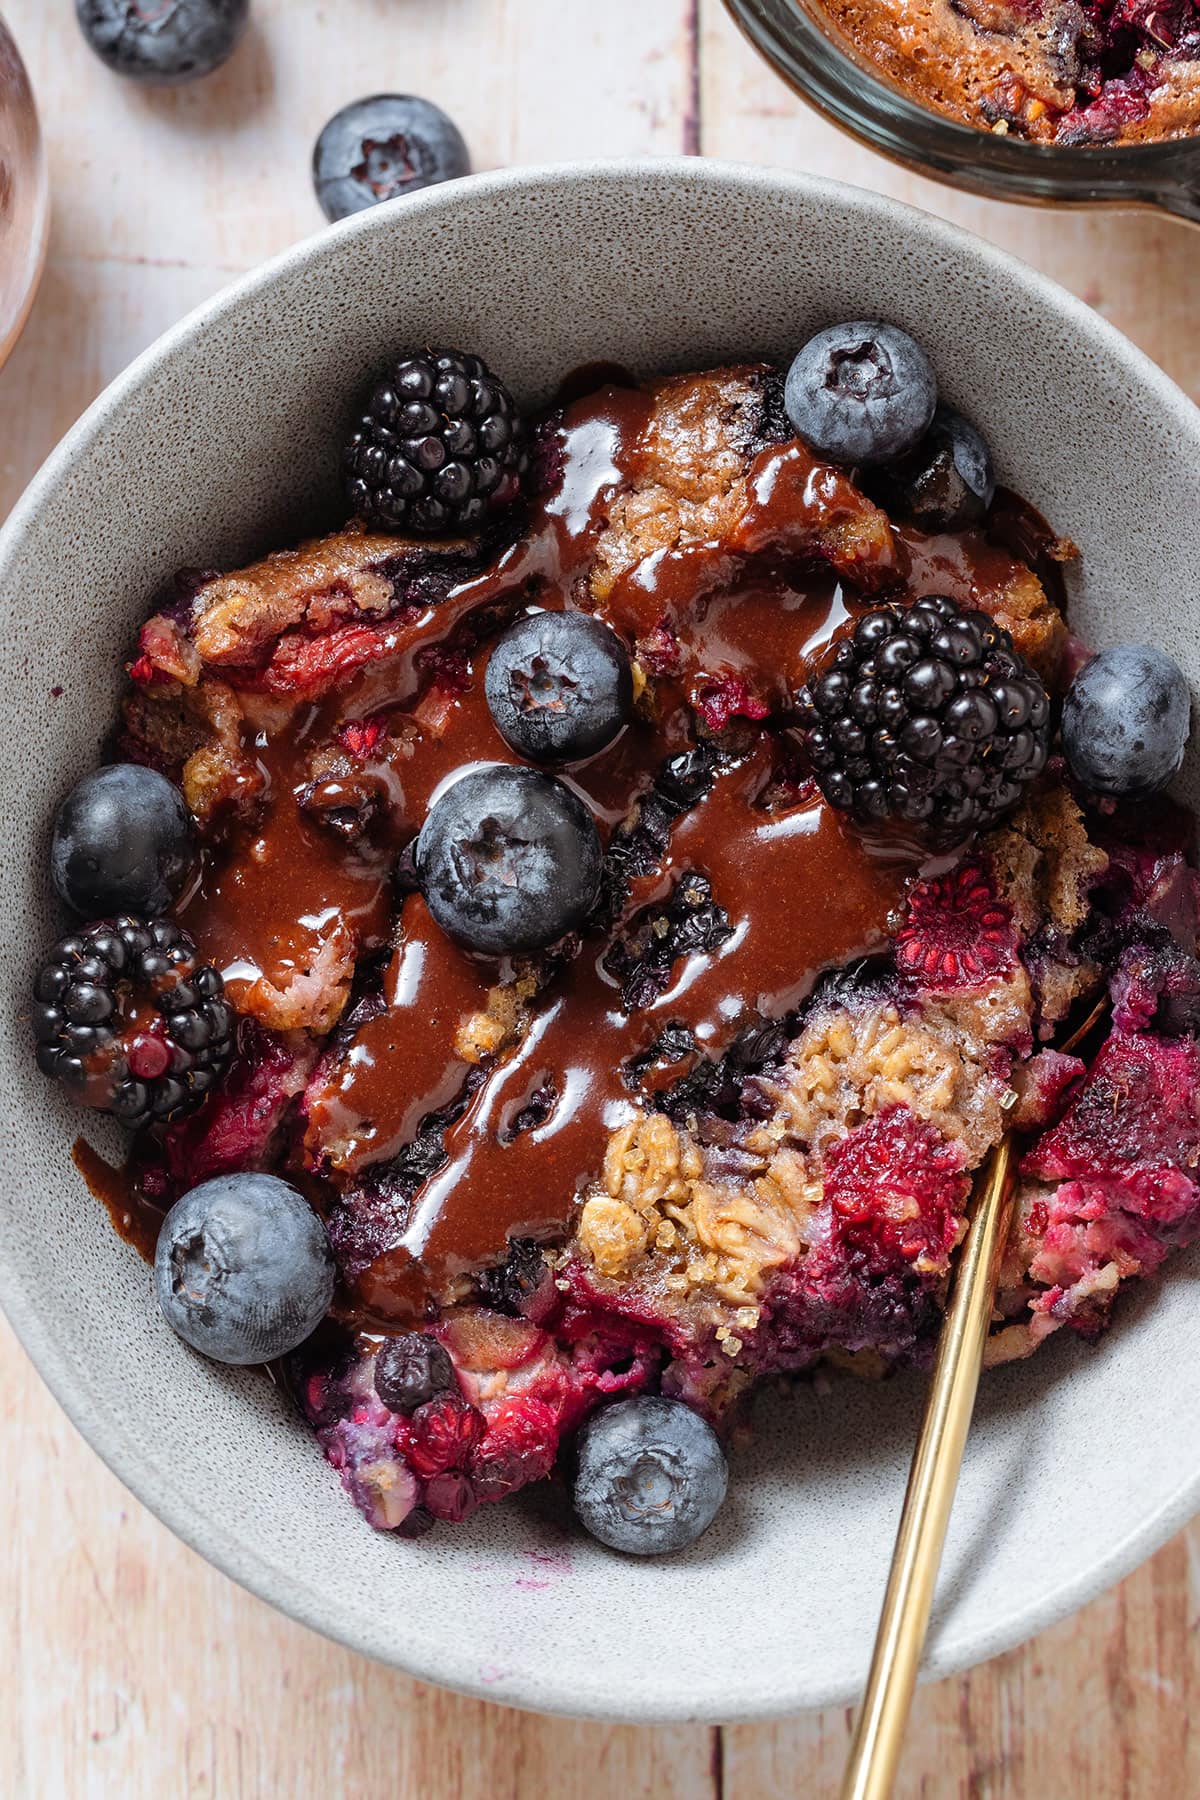 Baked berry oatmeal in a grey bowl topped with blueberries and blackberries and drizzled with chocolate sauce.